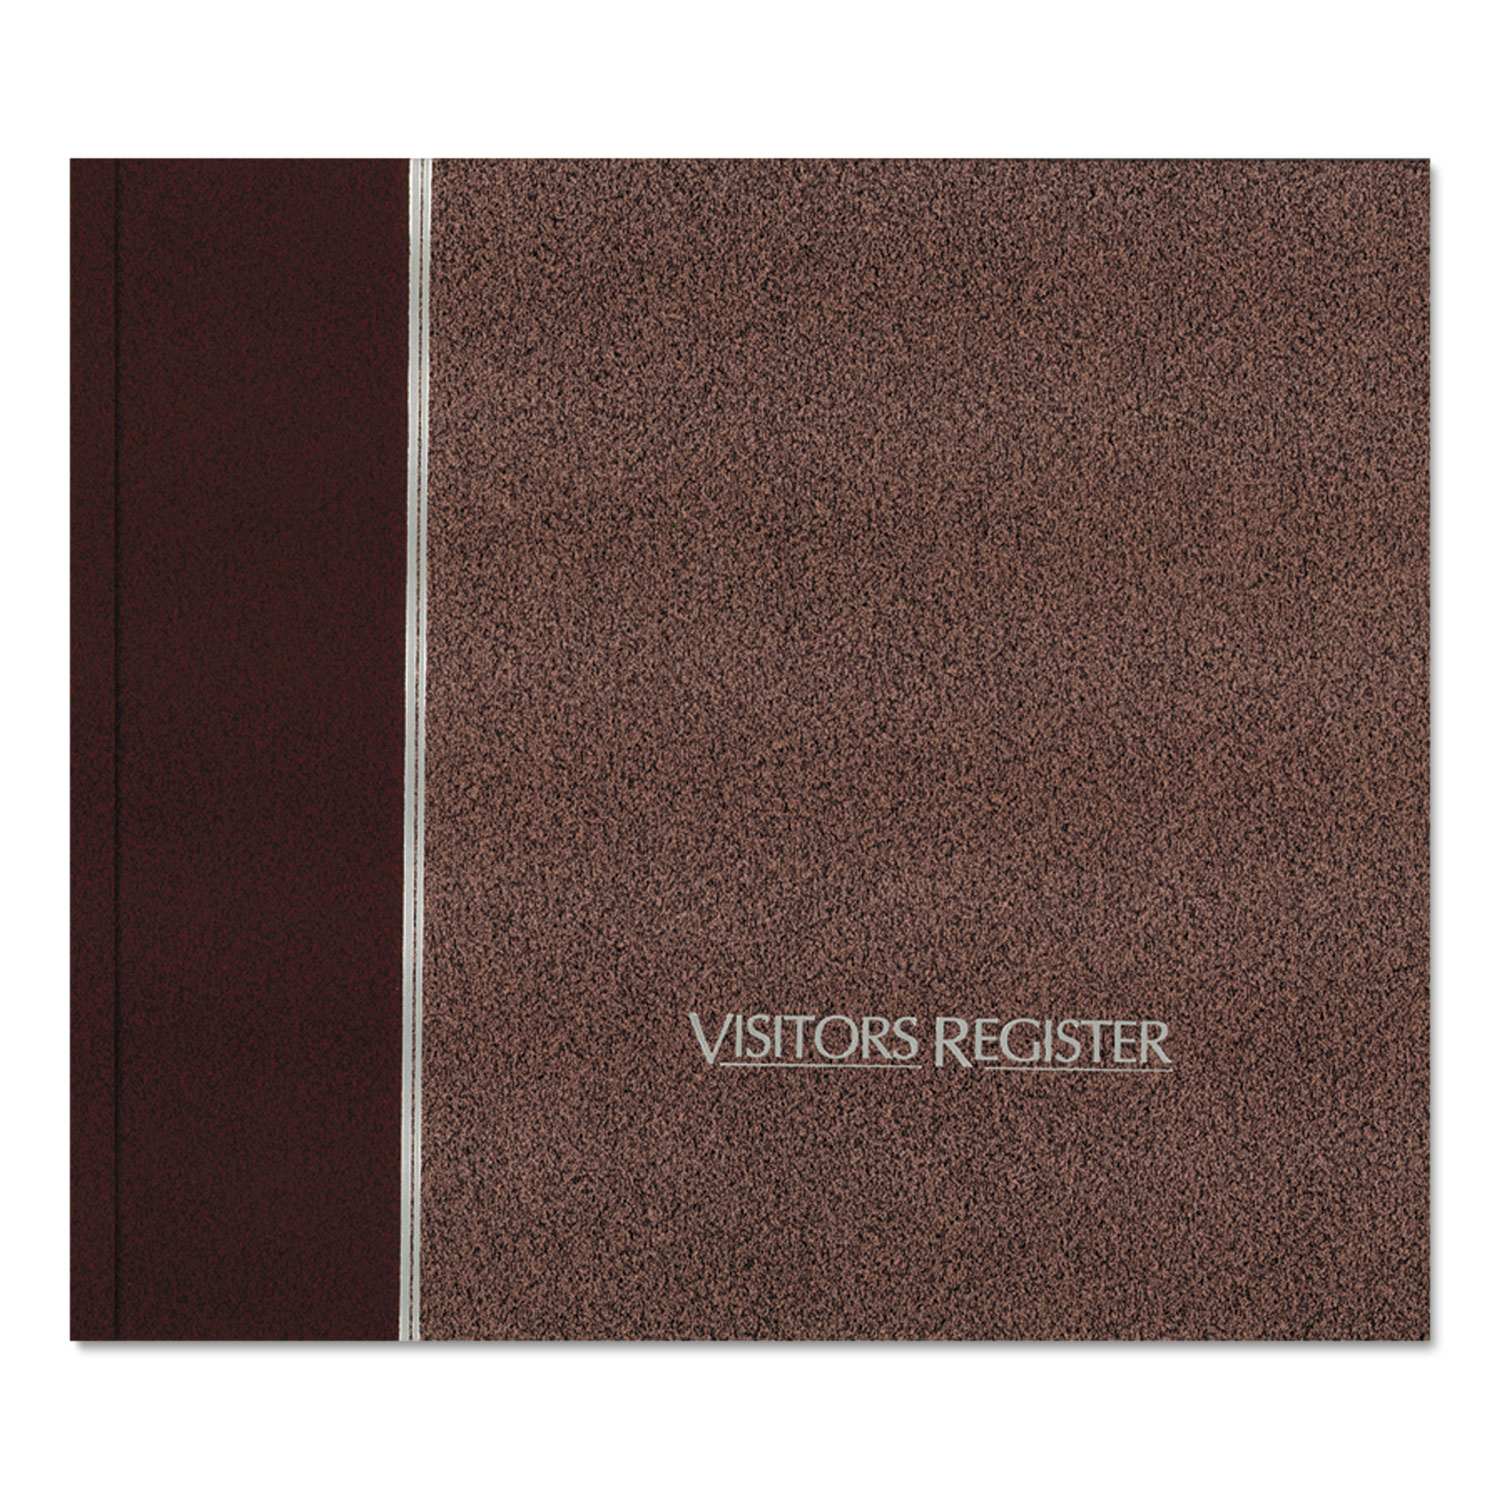  National 57803 Visitor Register Book, Burgundy Hardcover, 128 Pages, 8 1/2 x 9 7/8 (RED57803) 